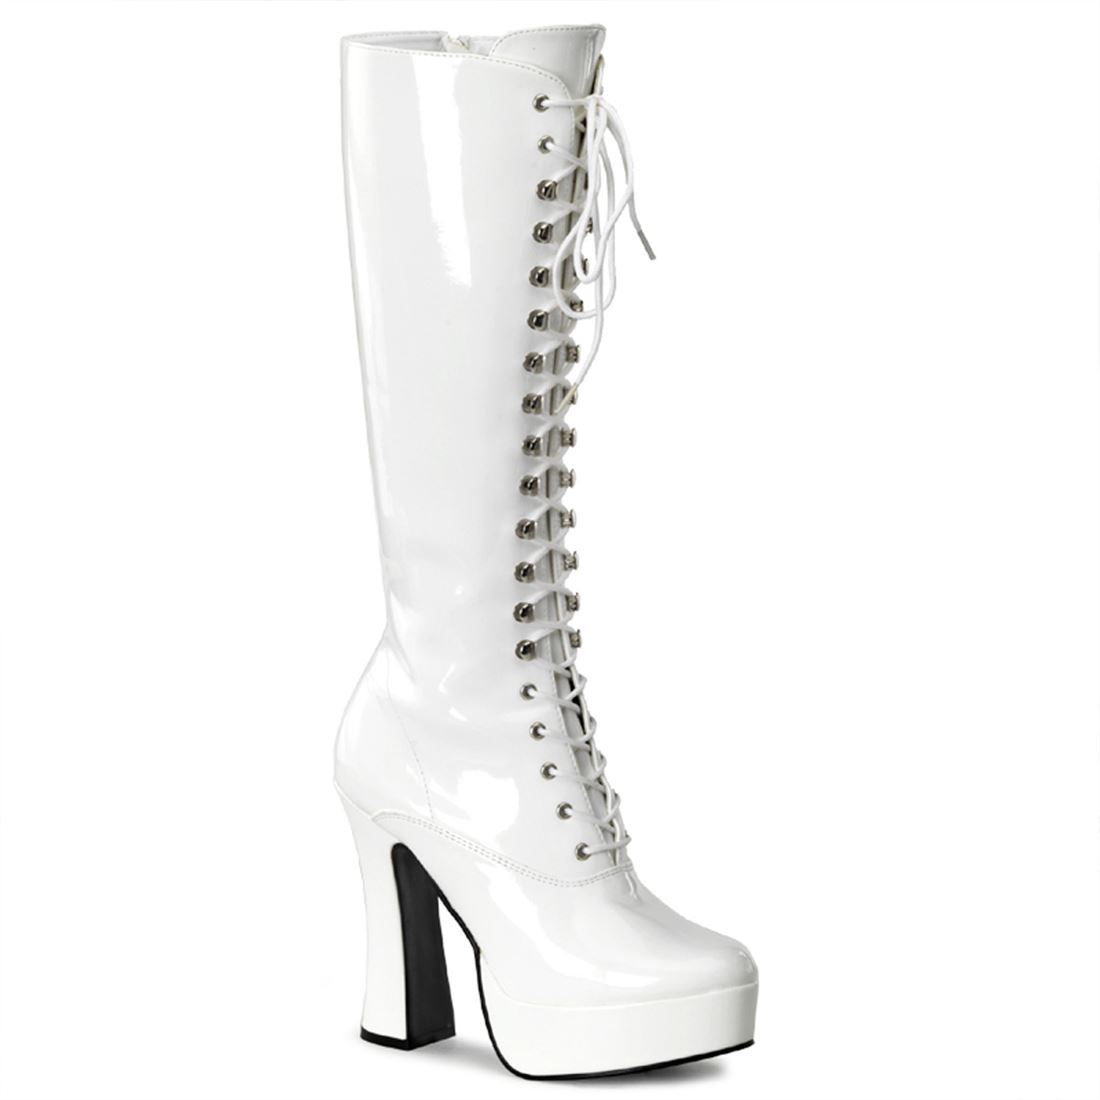 5" Electra Lace Up Knee Boot in white patent, right side view.